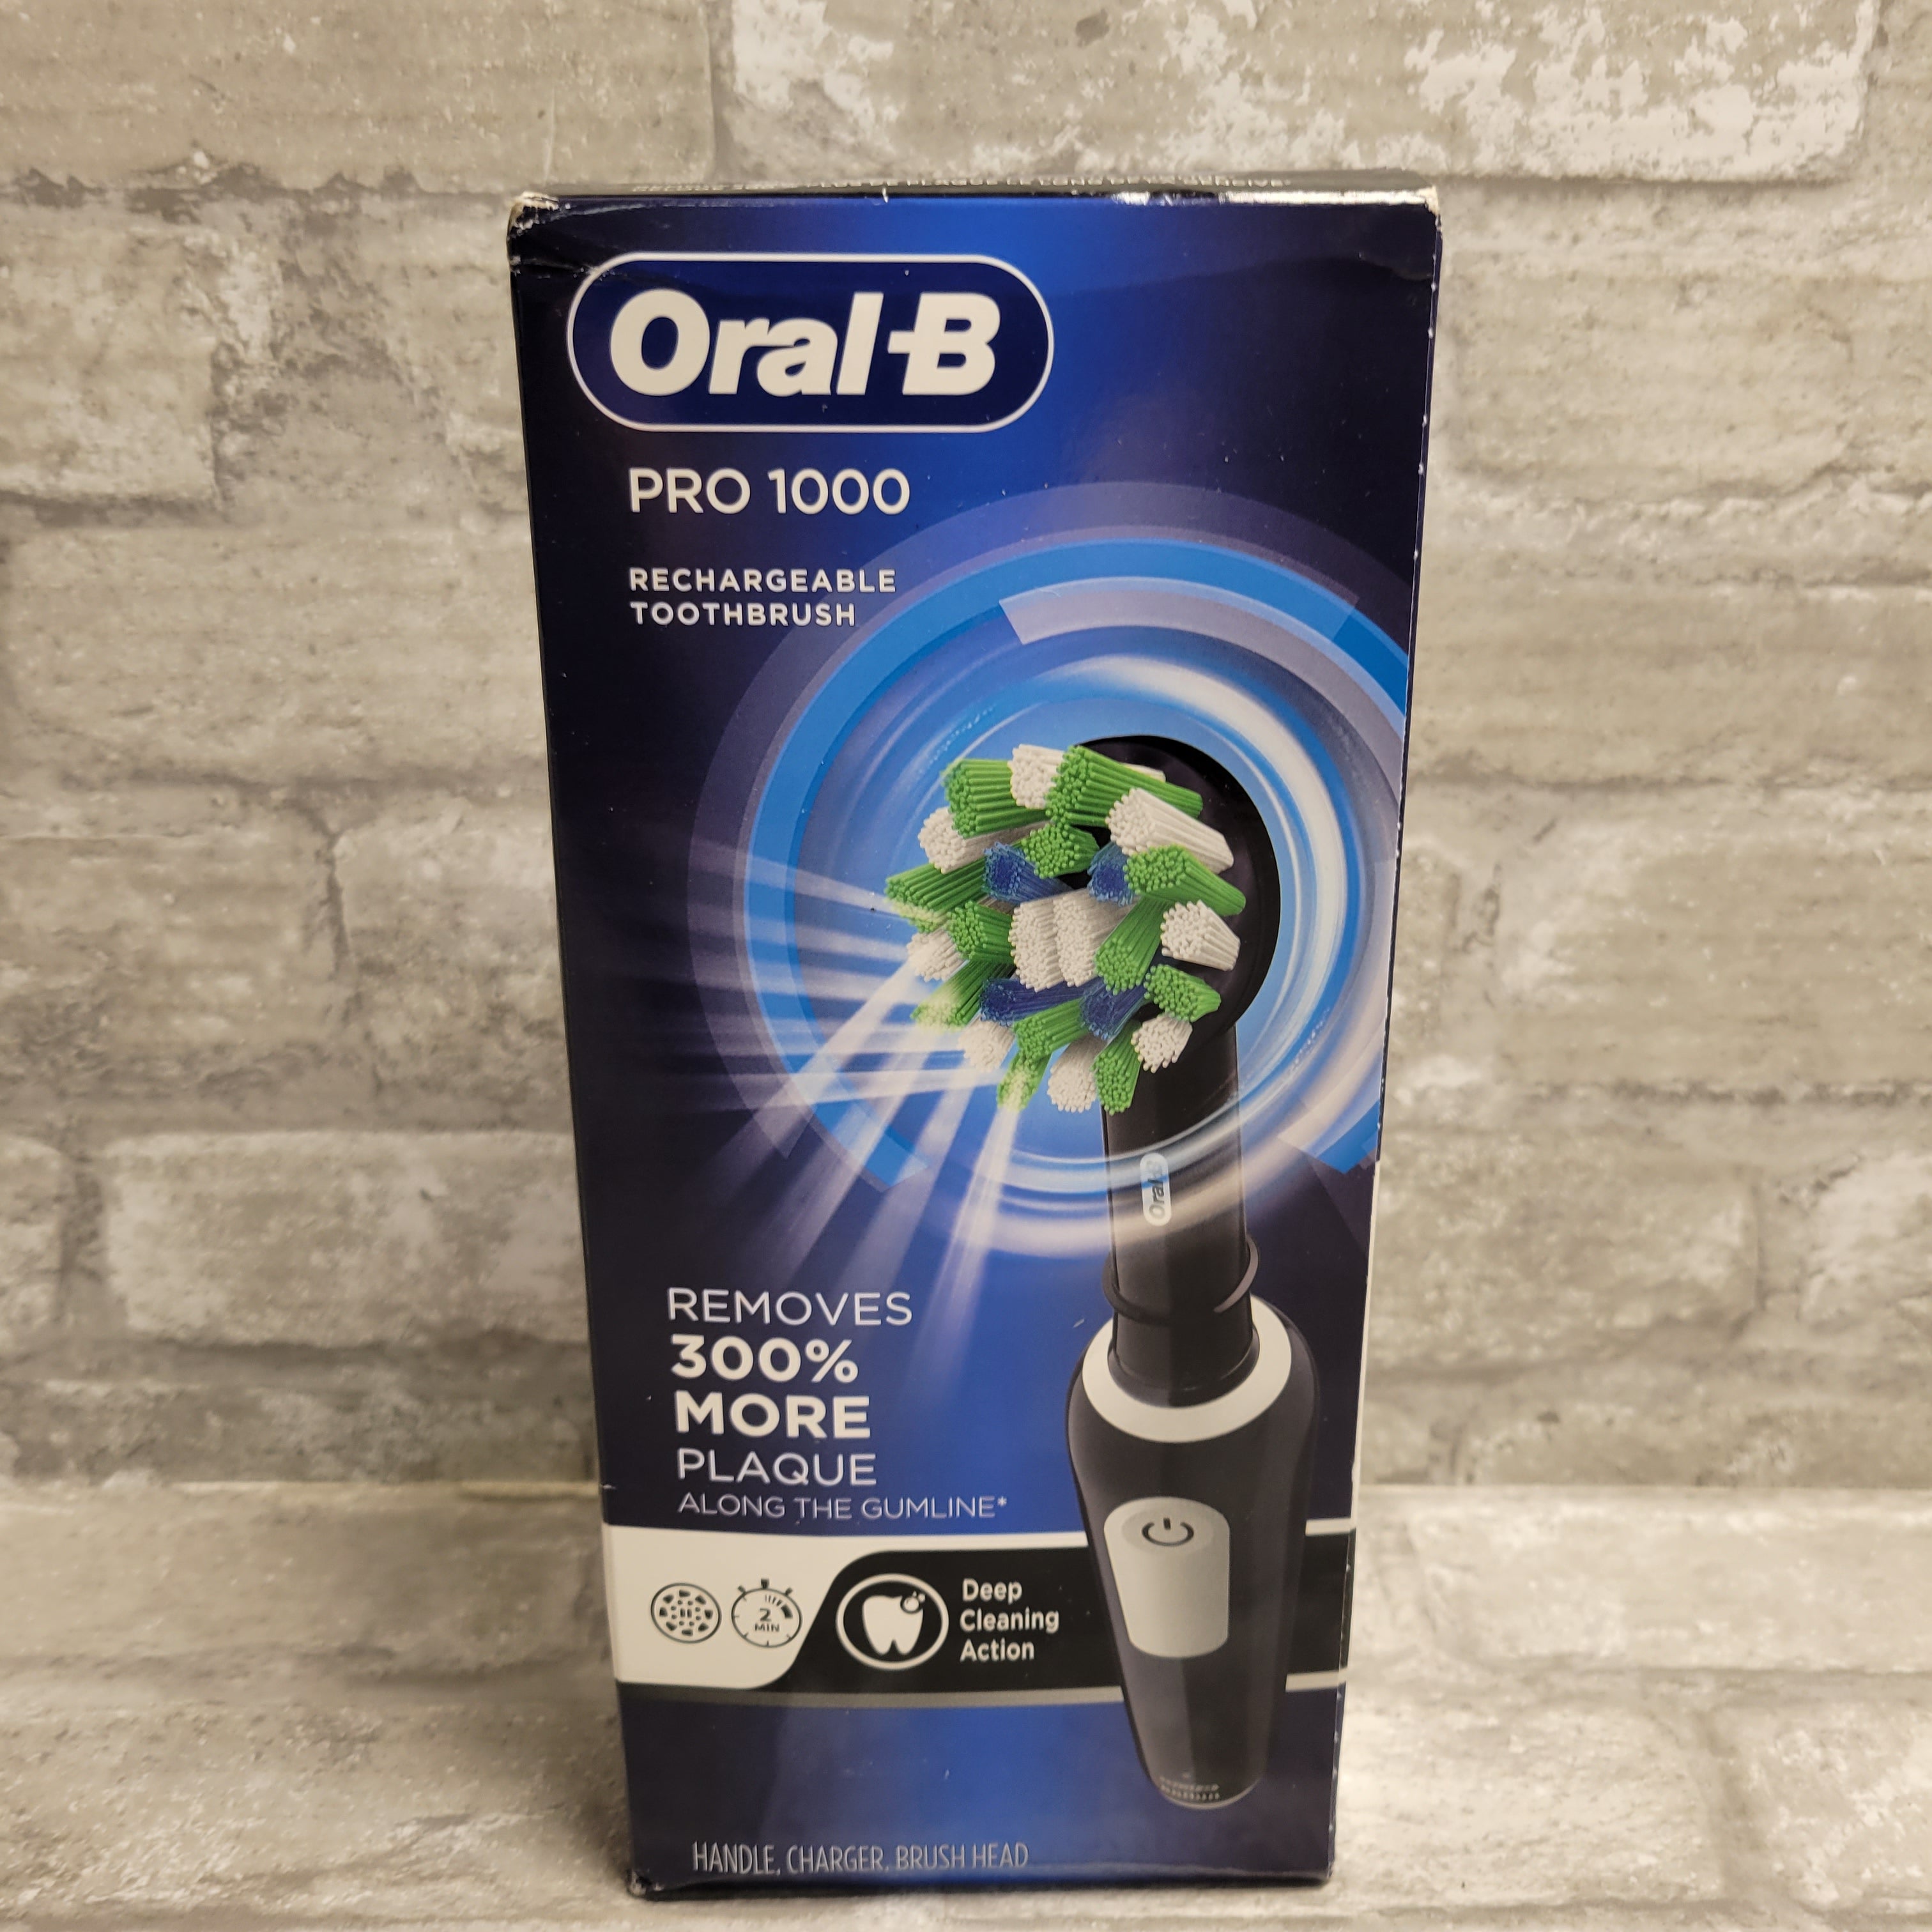 Oral-B PRO 1000 Rechargeable Toothbrush Deep Cleaning, Black (8038524977390)